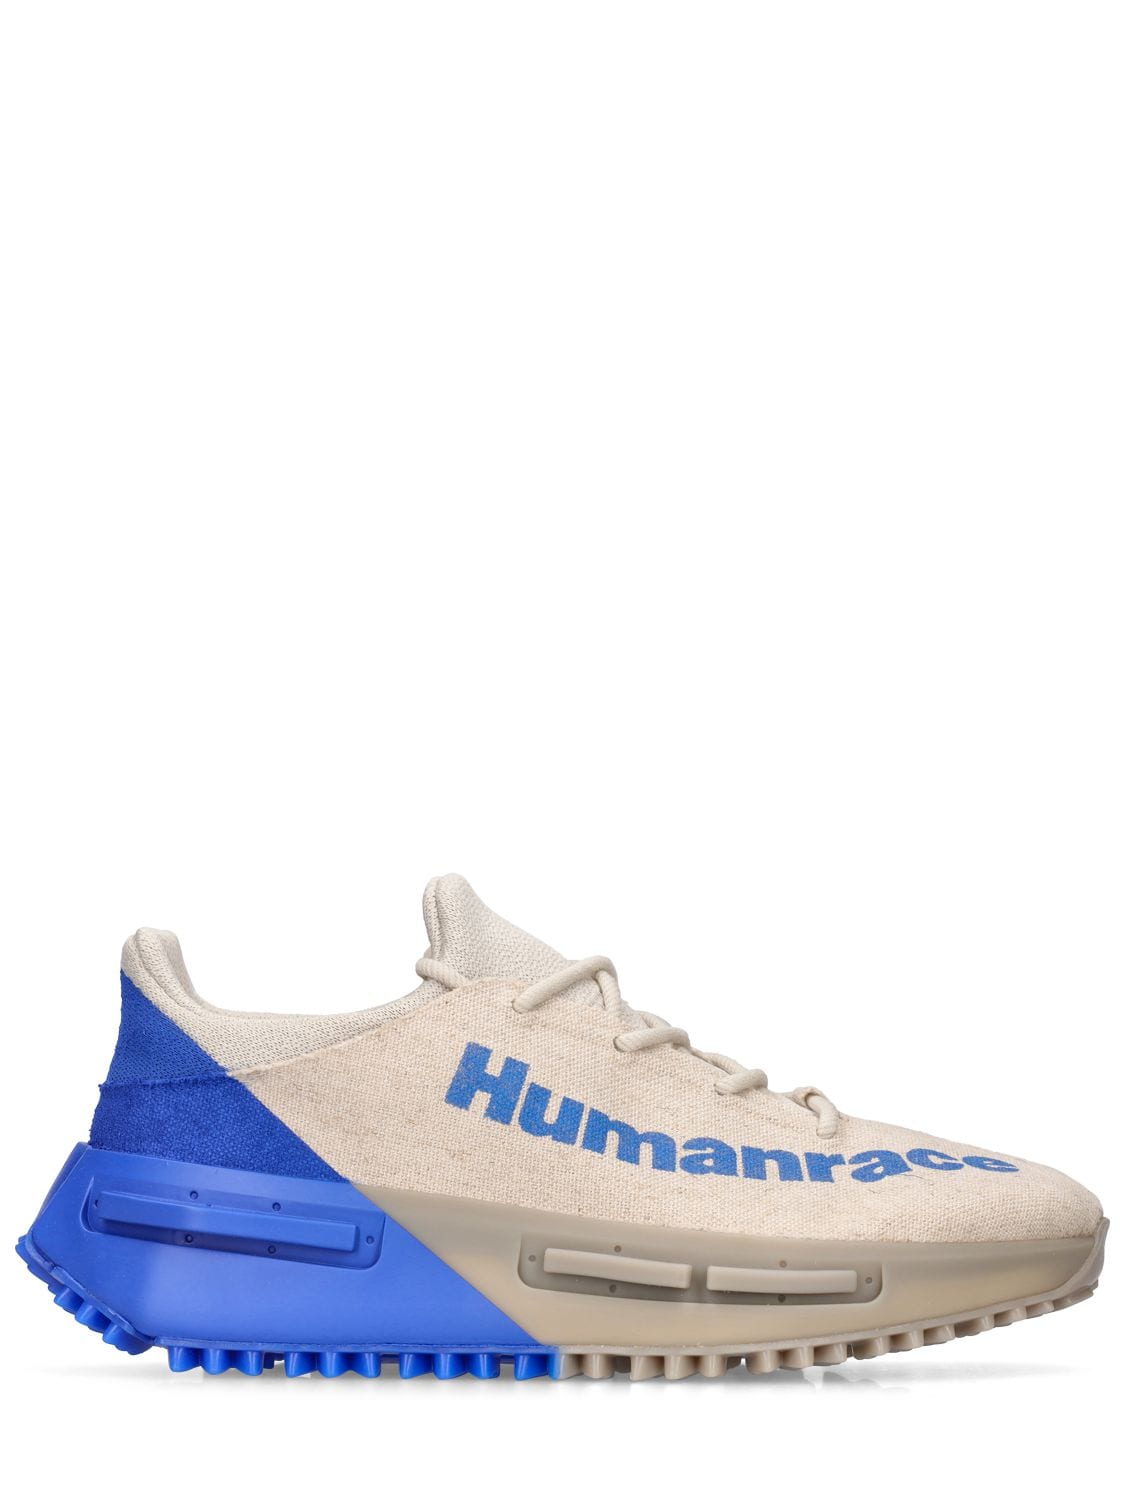 ADIDAS ORIGINALS HUMANRACE NMD S1 SNEAKERS